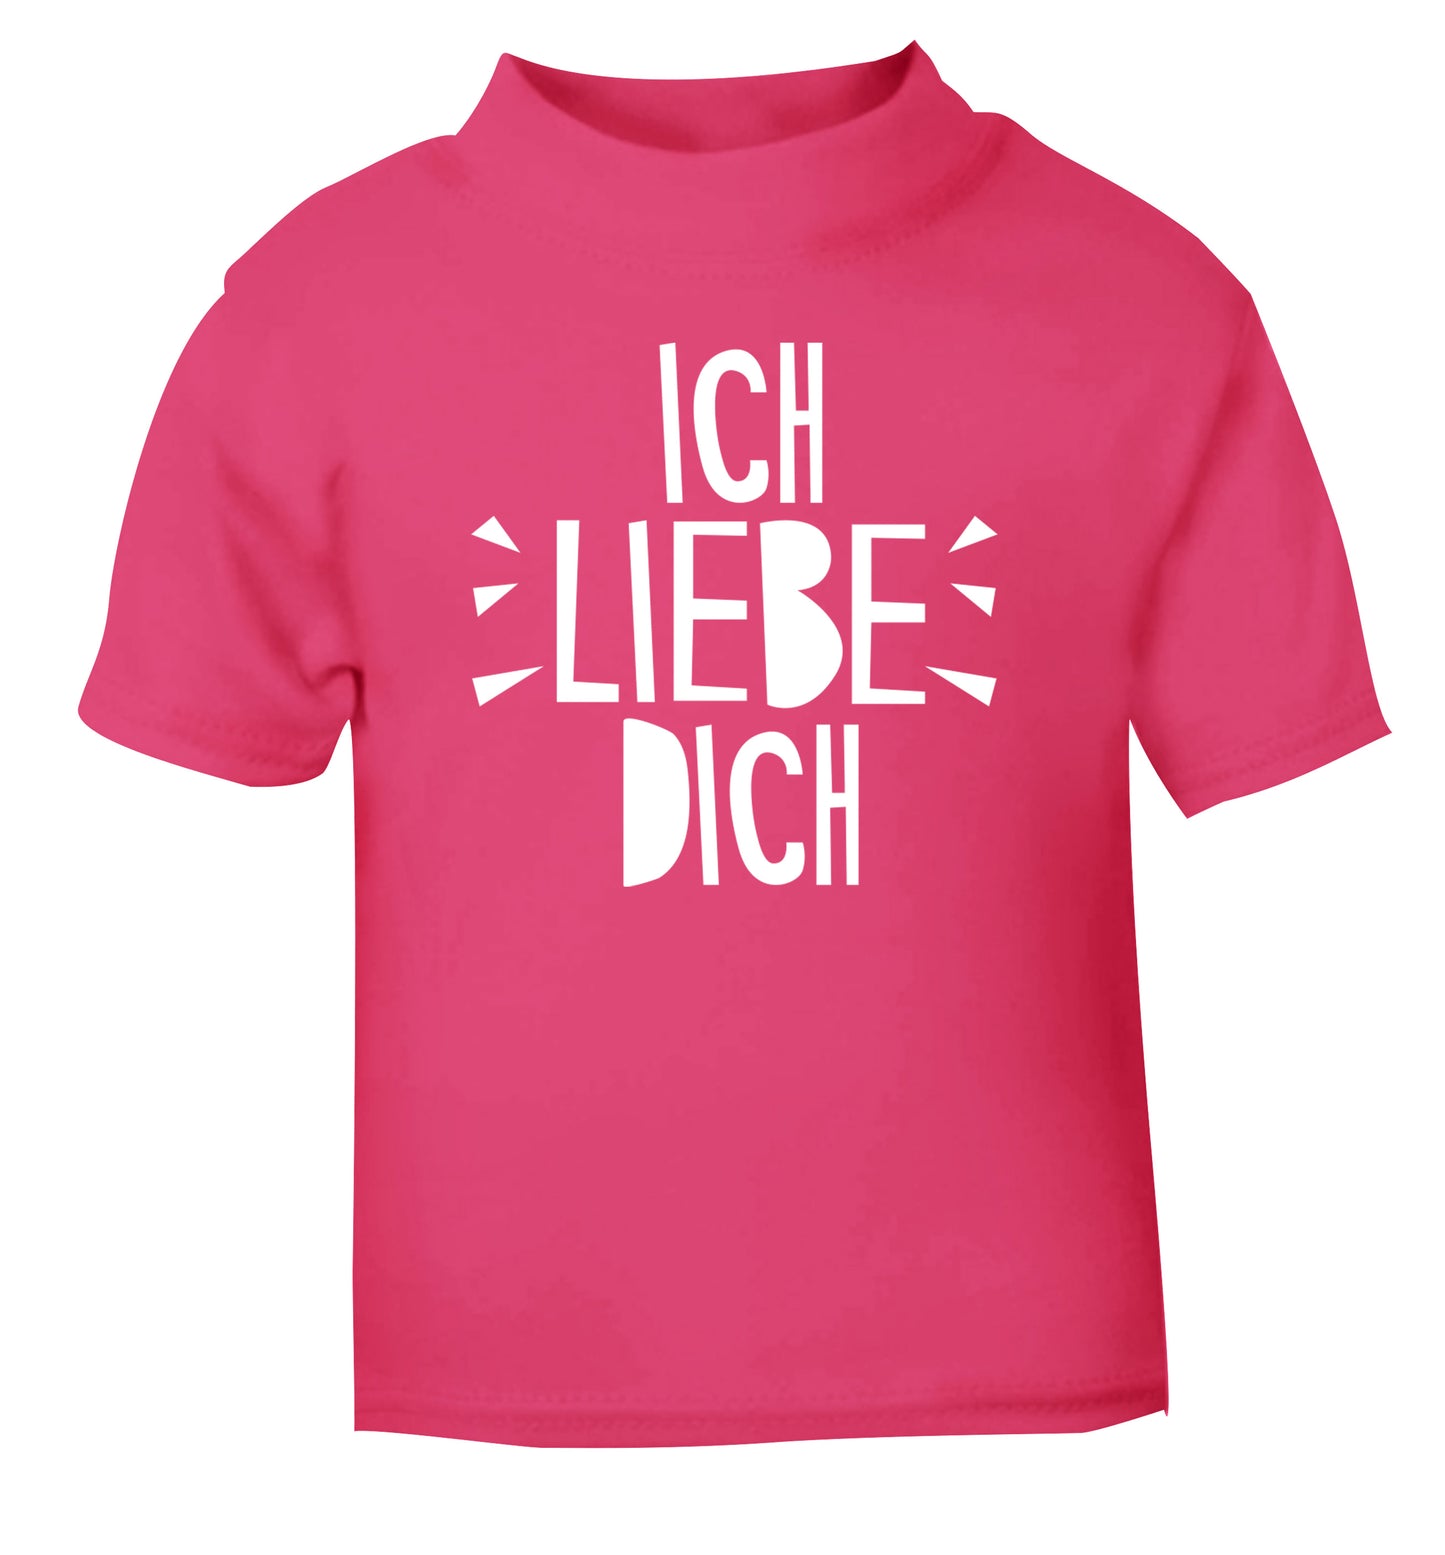 Ich liebe dich - I love you pink Baby Toddler Tshirt 2 Years